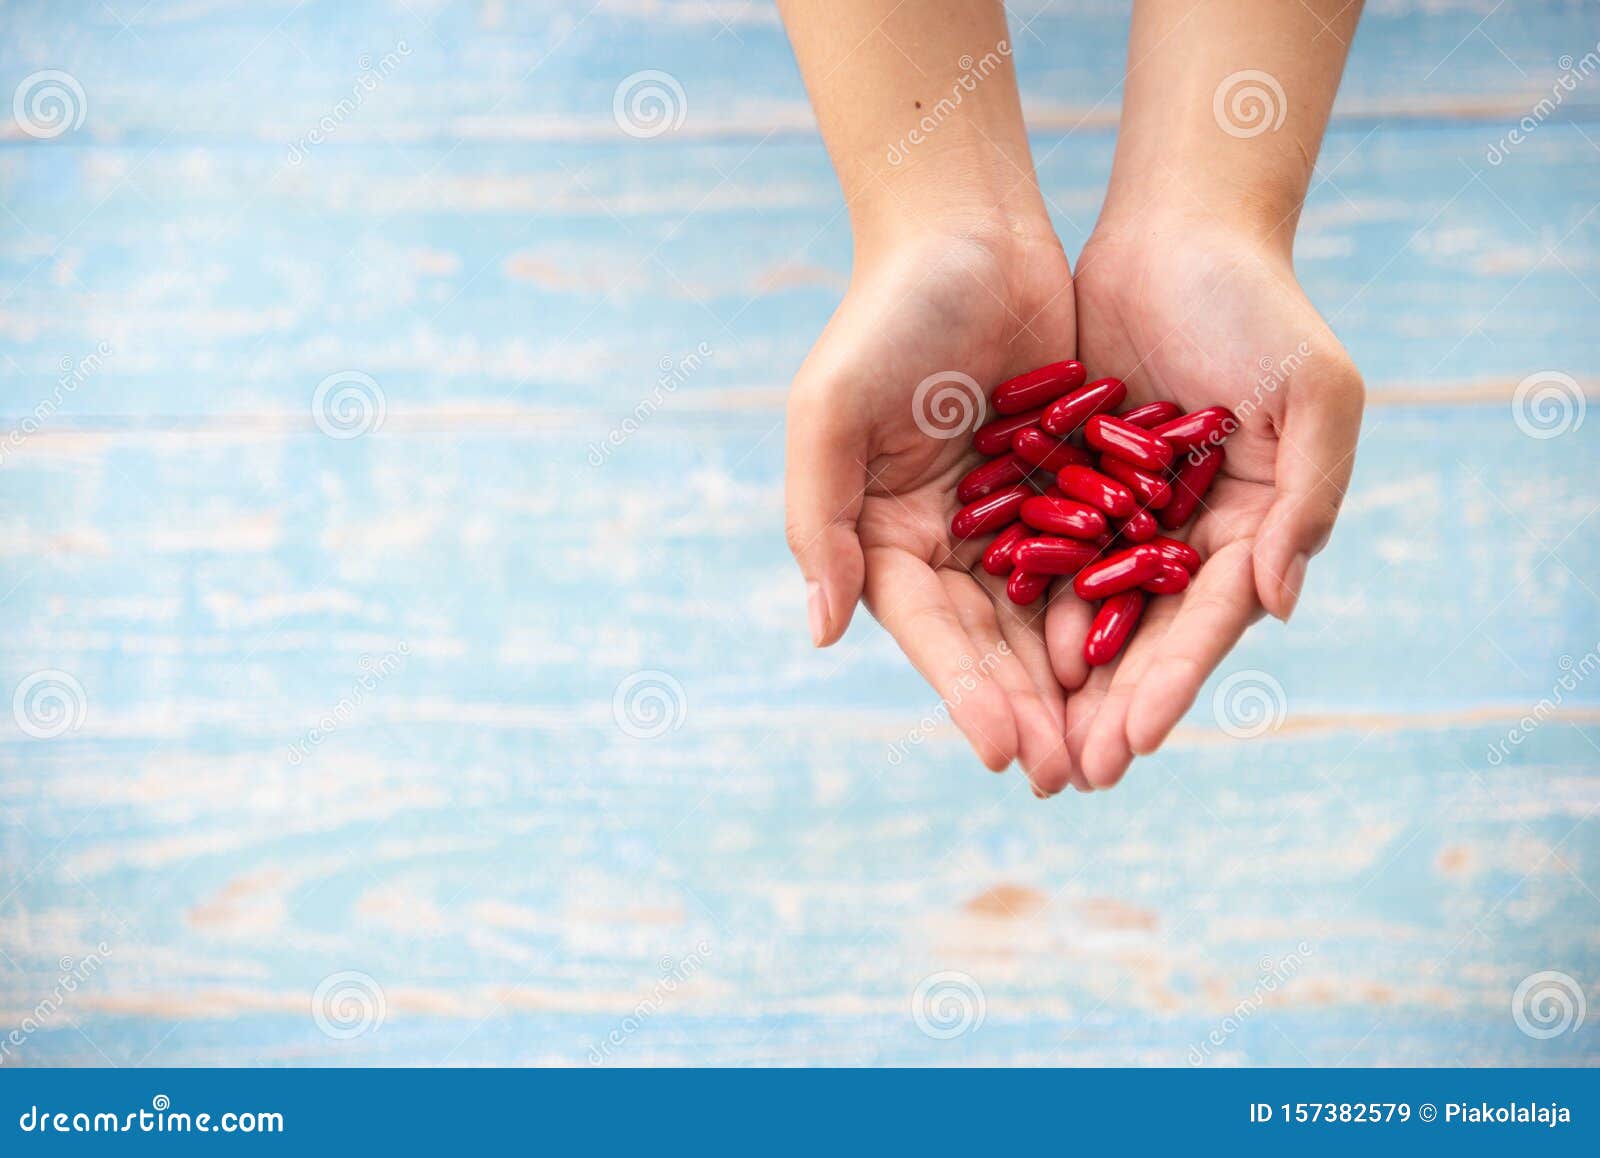 medicine, healthcare, concept. closed up hands hold the red medicines or vitamines on the wooden background